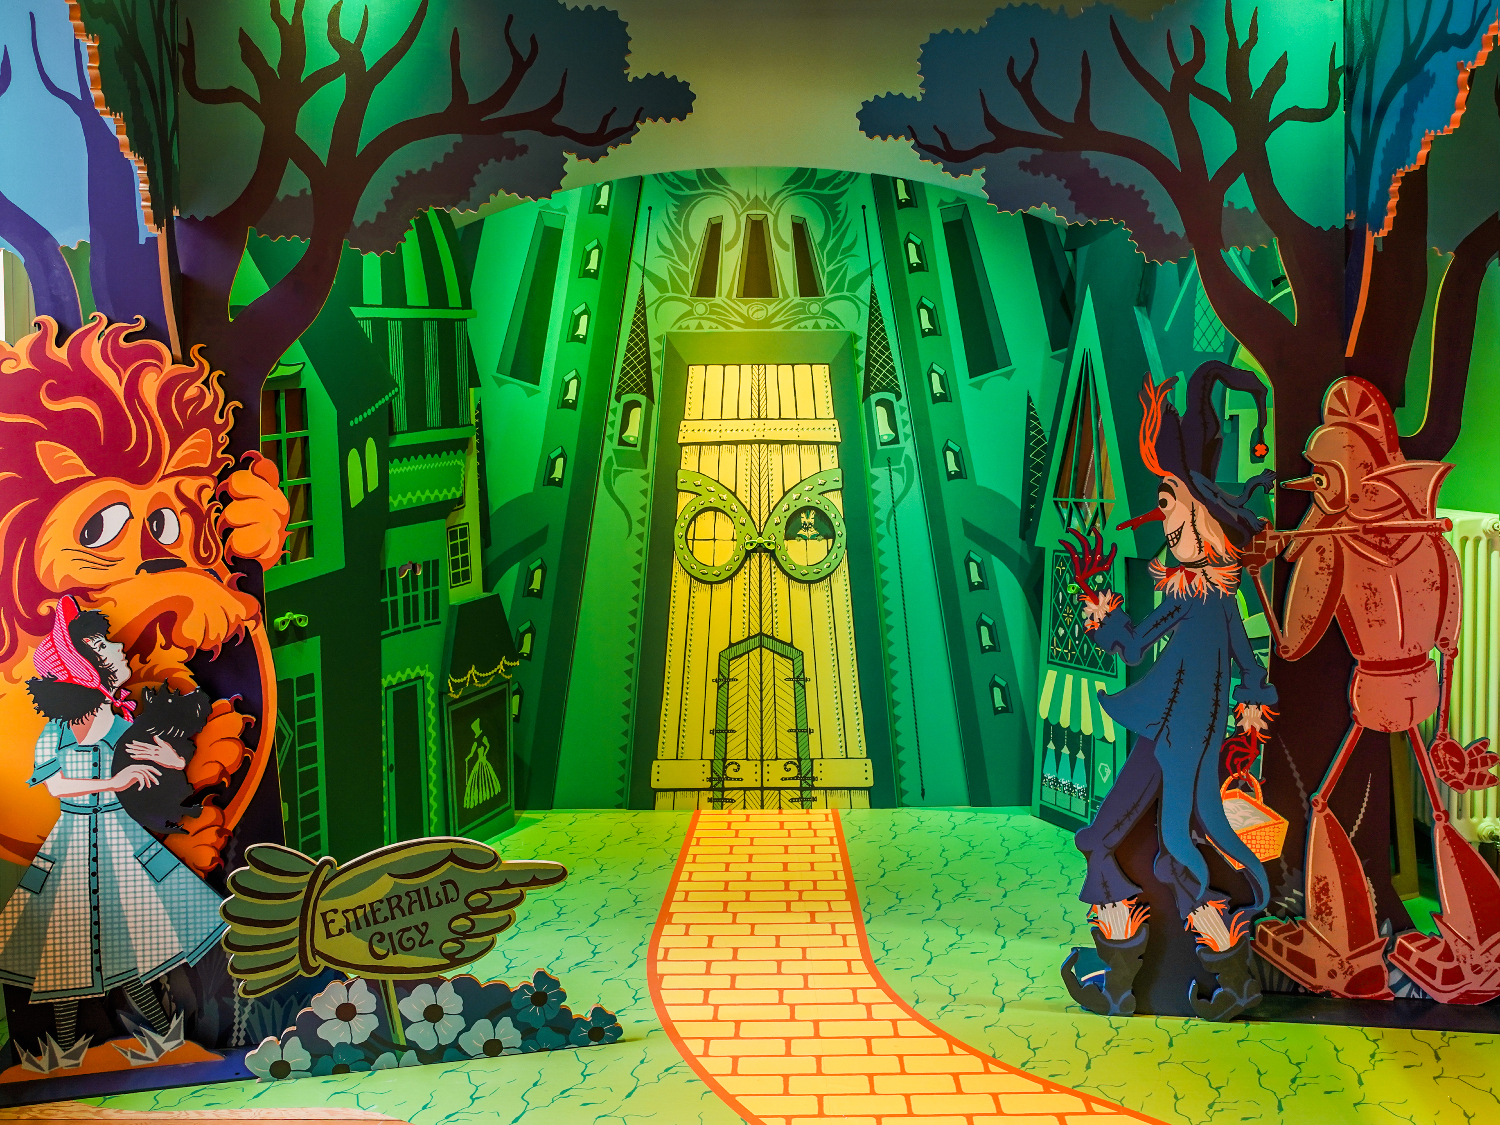 “The Wizard of Oz” is featured at the “Enchanted Journeys” exhibition.